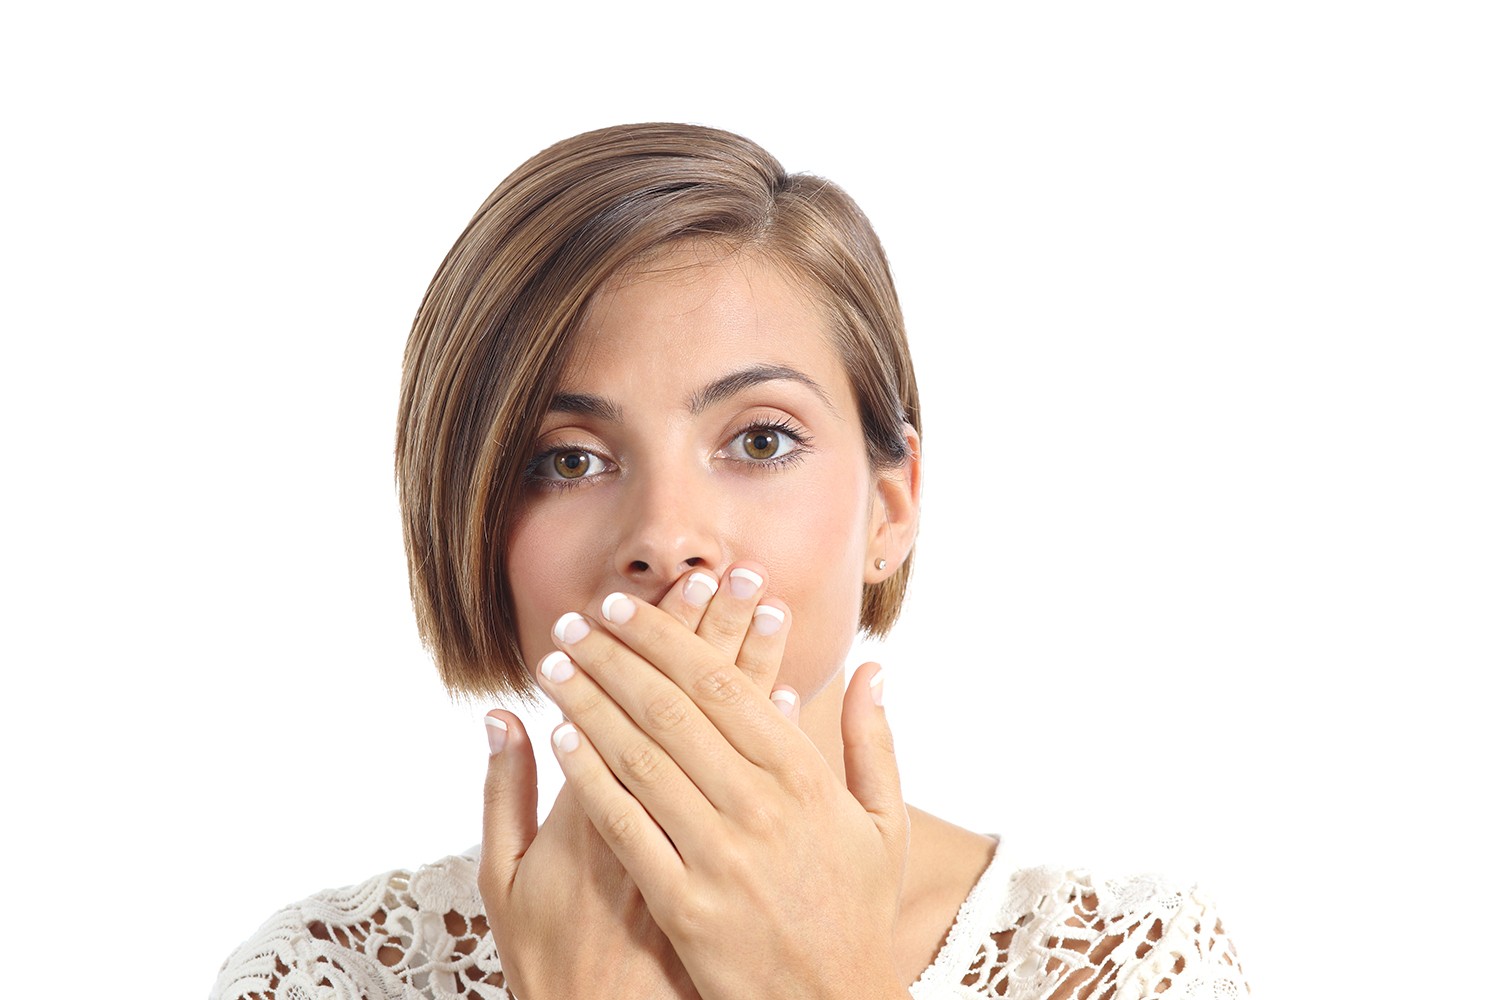 Factors that lead to bad breath